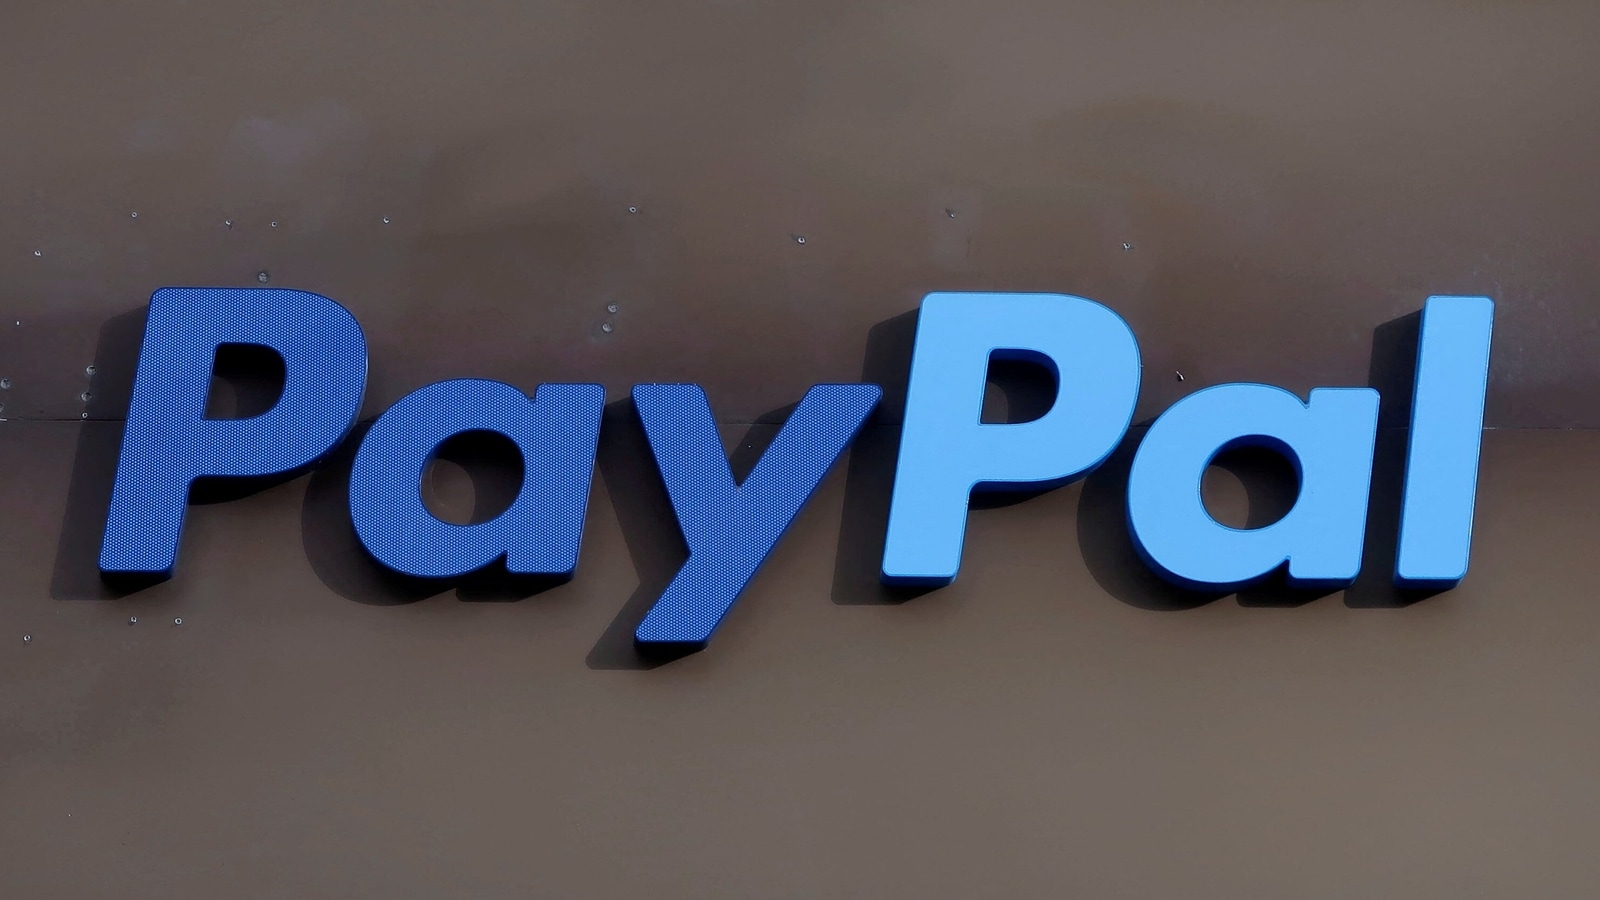 In latest crypto payments push, PayPal launches stablecoin